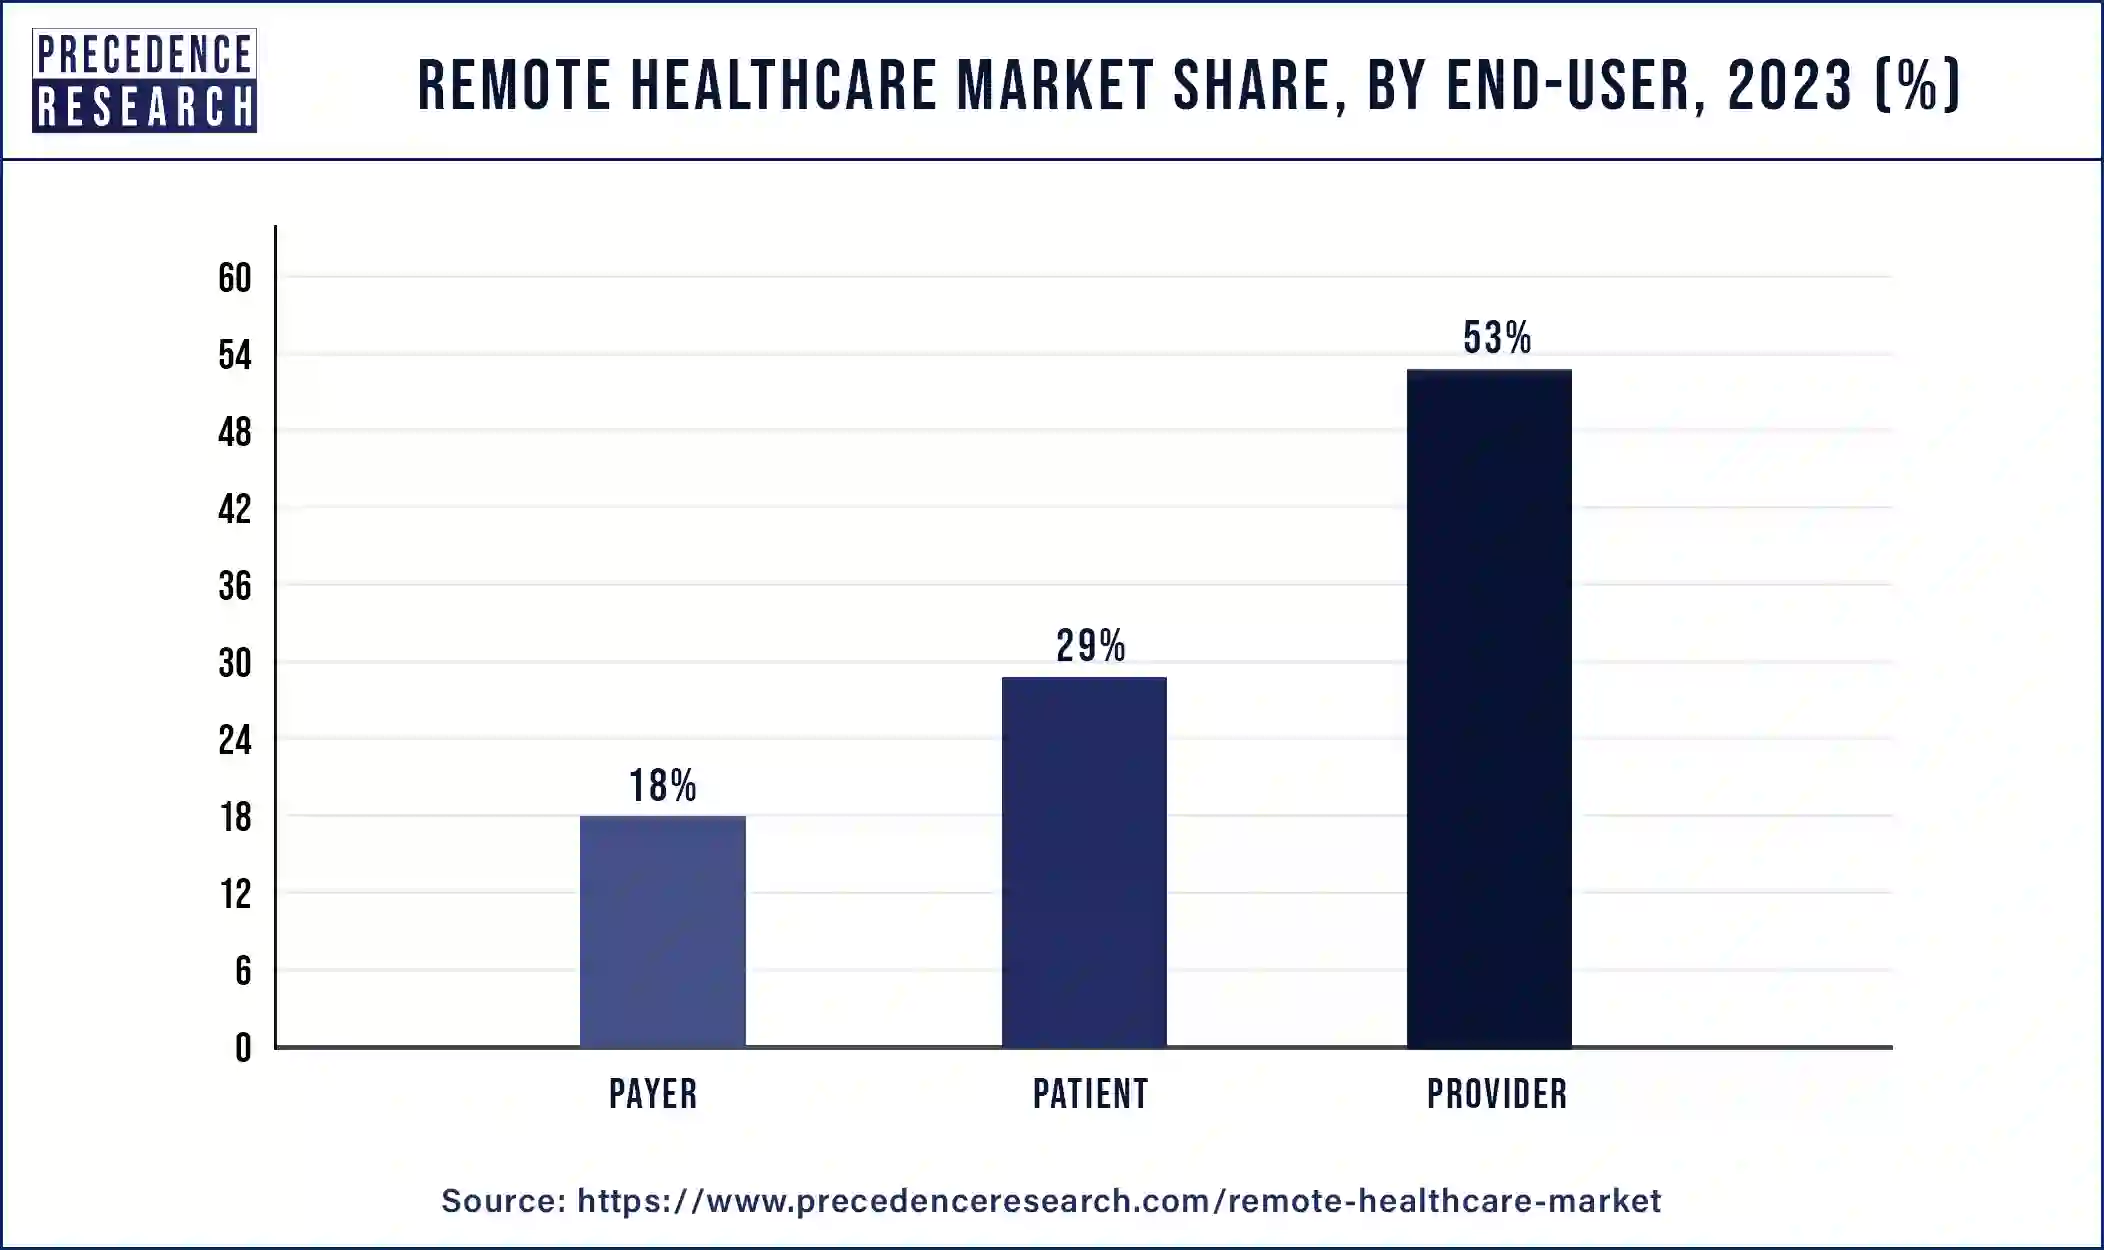 Remote Healthcare Market Share, By End-user, 2023 (%)